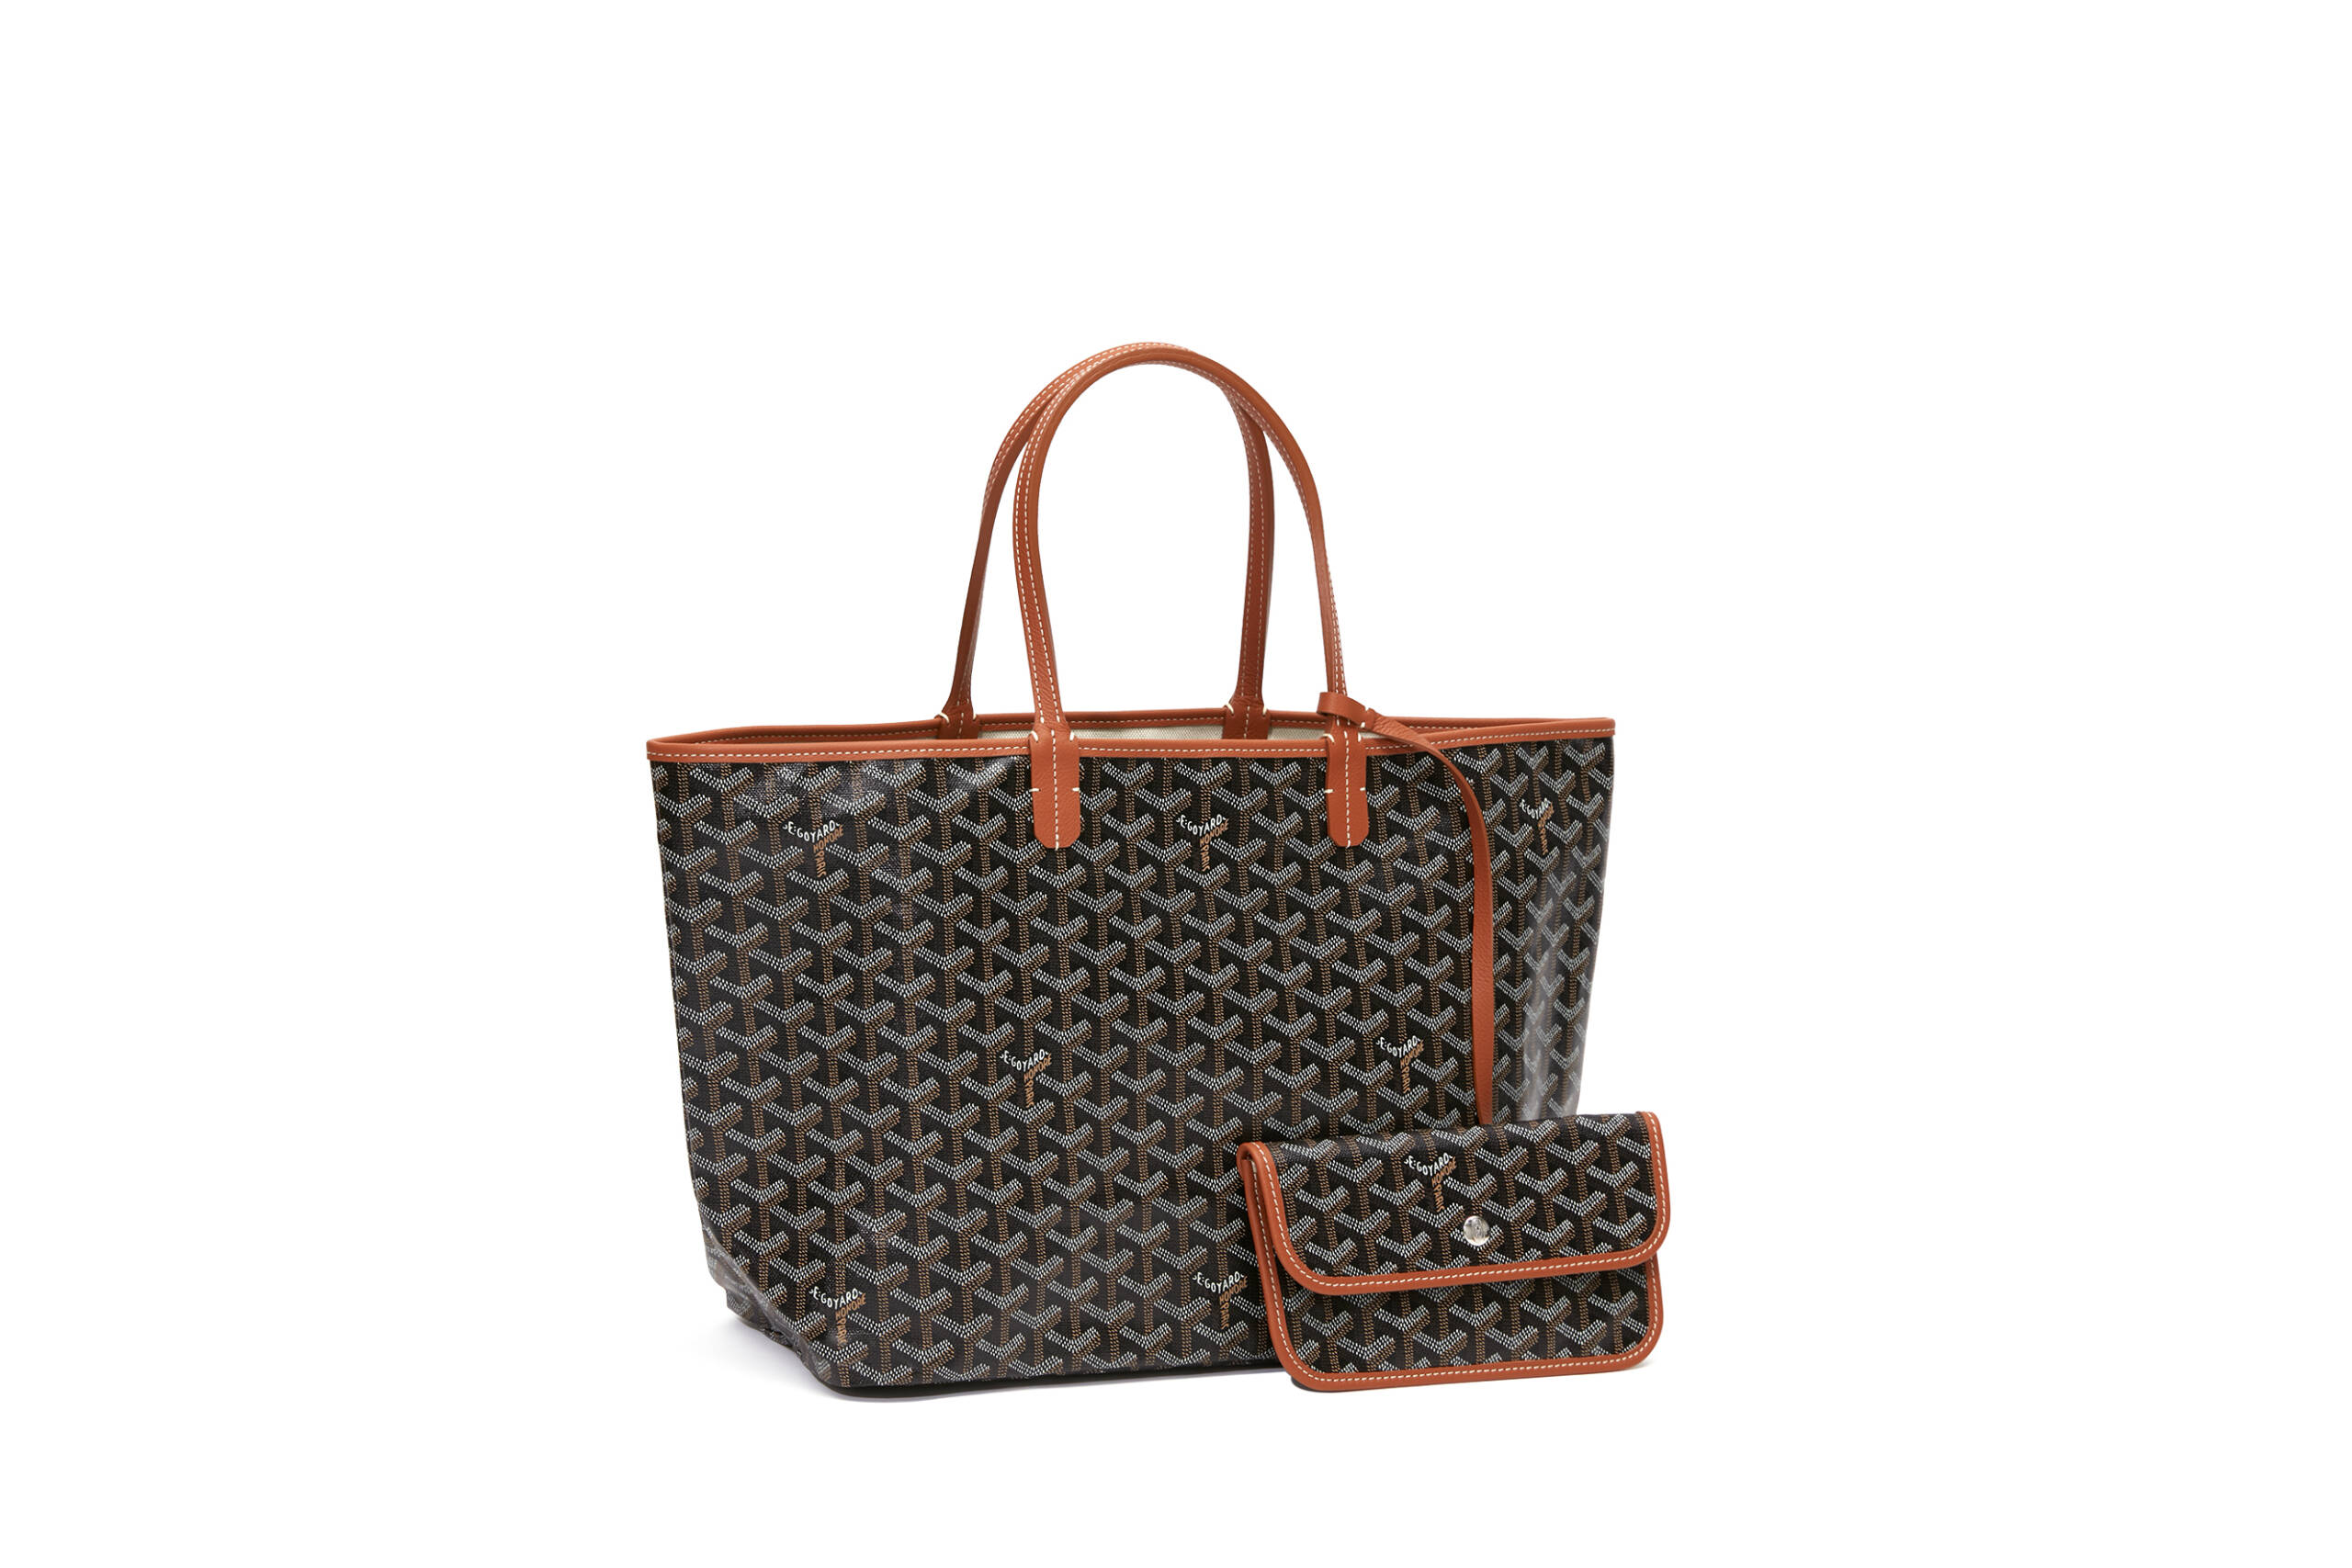 Maison Goyard - The Anjou bag comes in two sizes (PM or GM) and